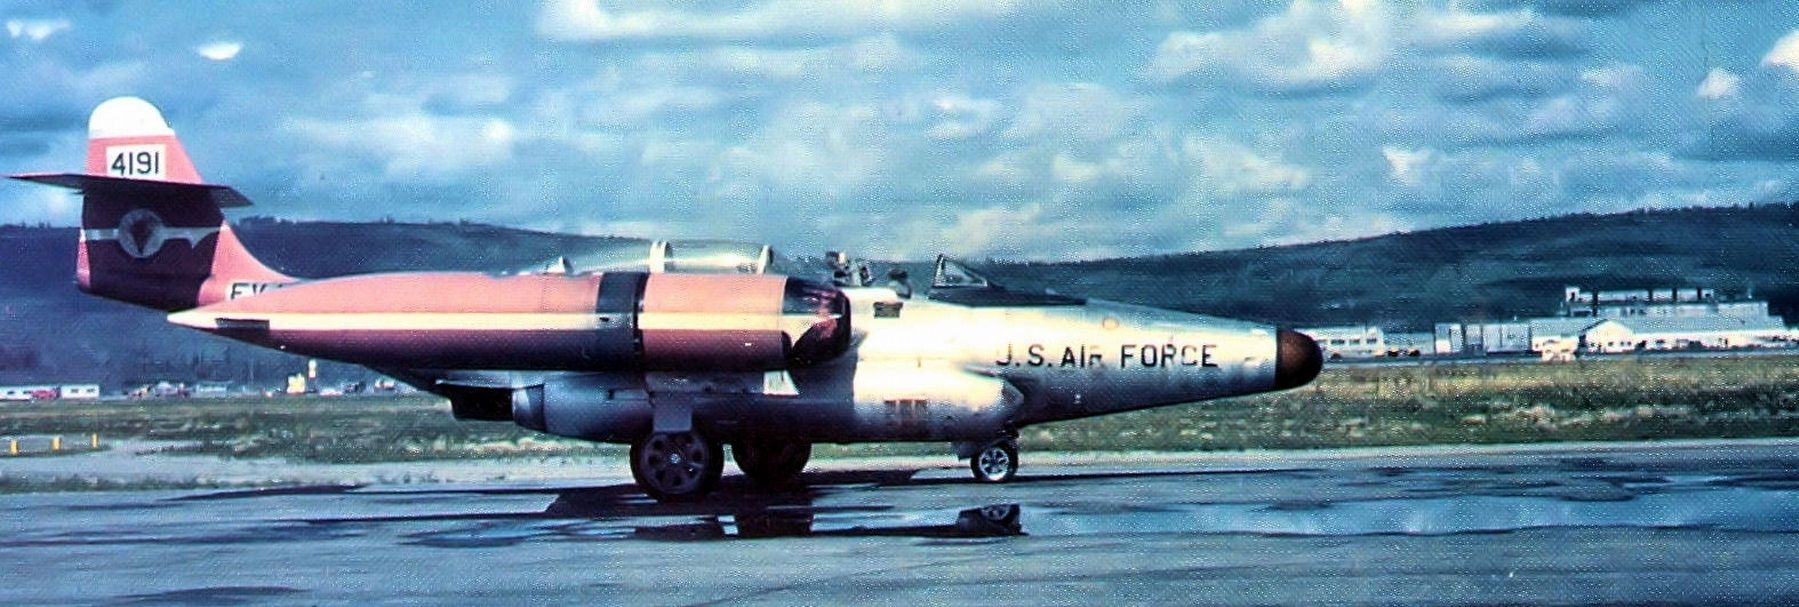 433rd FIS F-89D-75-NO Scorpion (s/n 54-191) about 1956 at Ladd AFB, Alaska image. Click for full size.